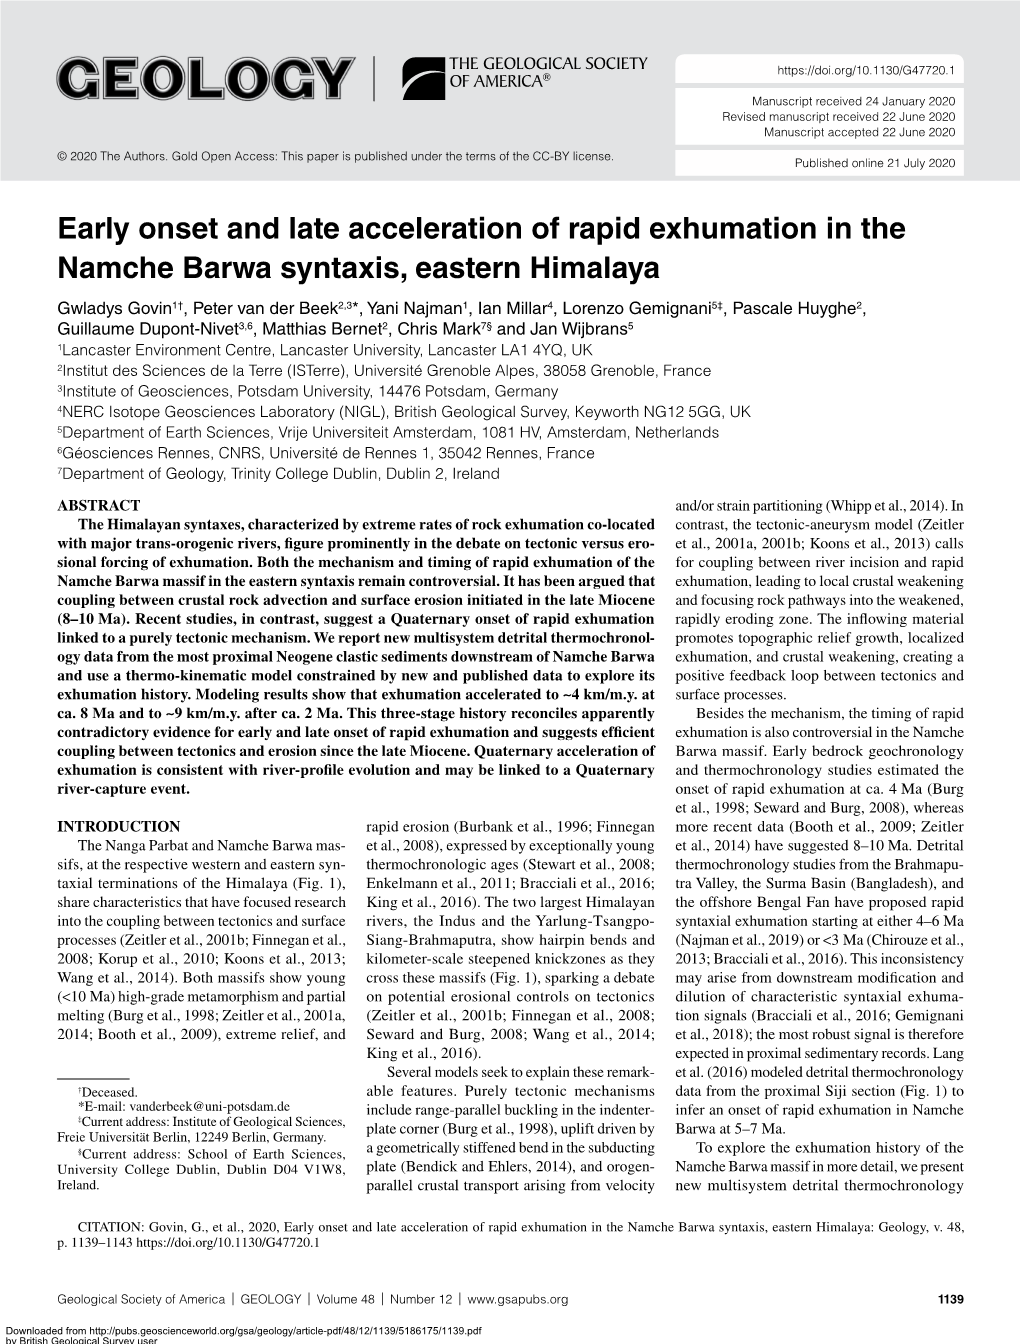 Early Onset and Late Acceleration of Rapid Exhumation in the Namche